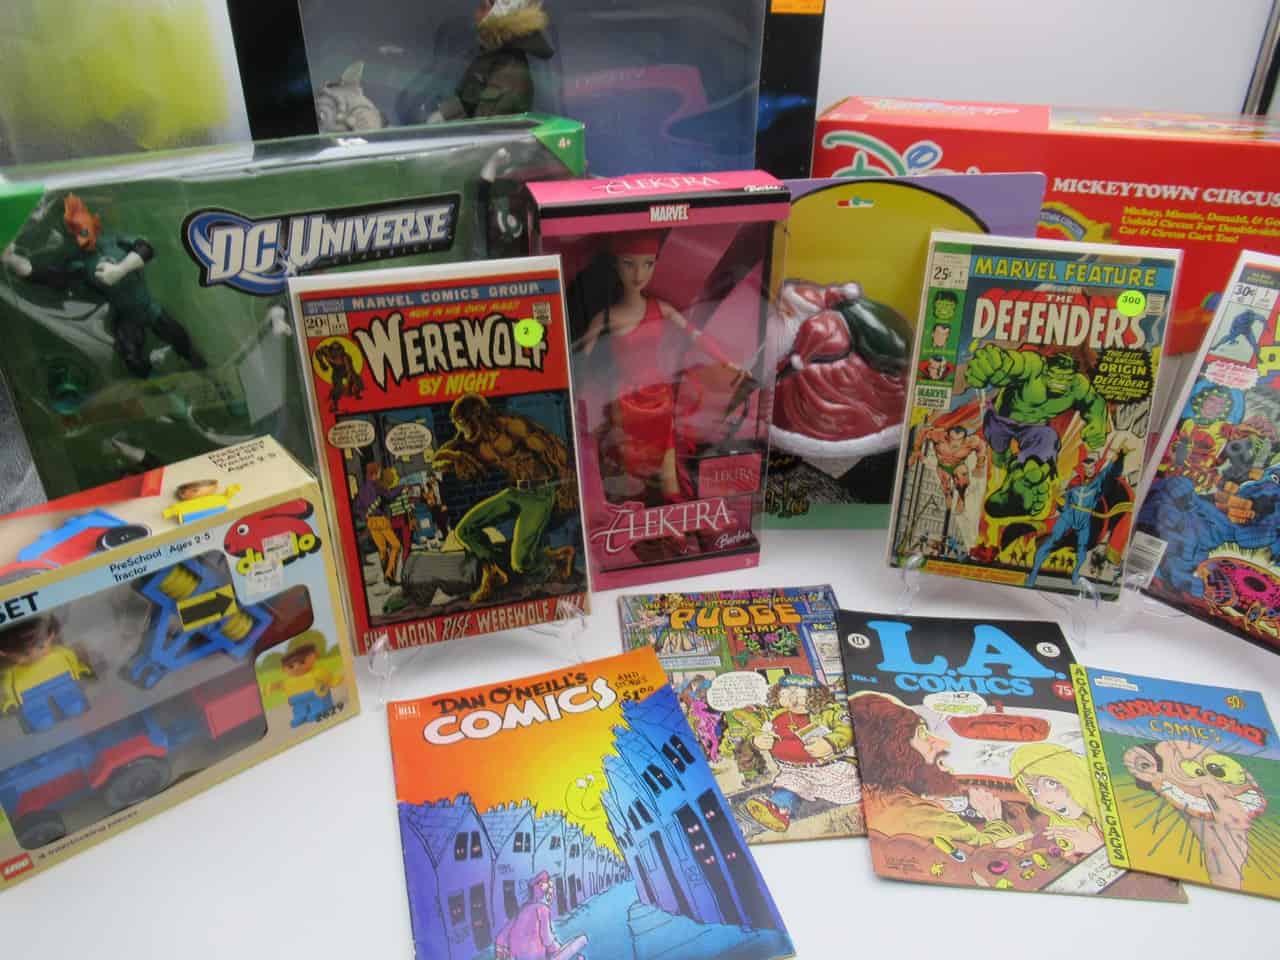 Toys and comics coming to auction January 21st!